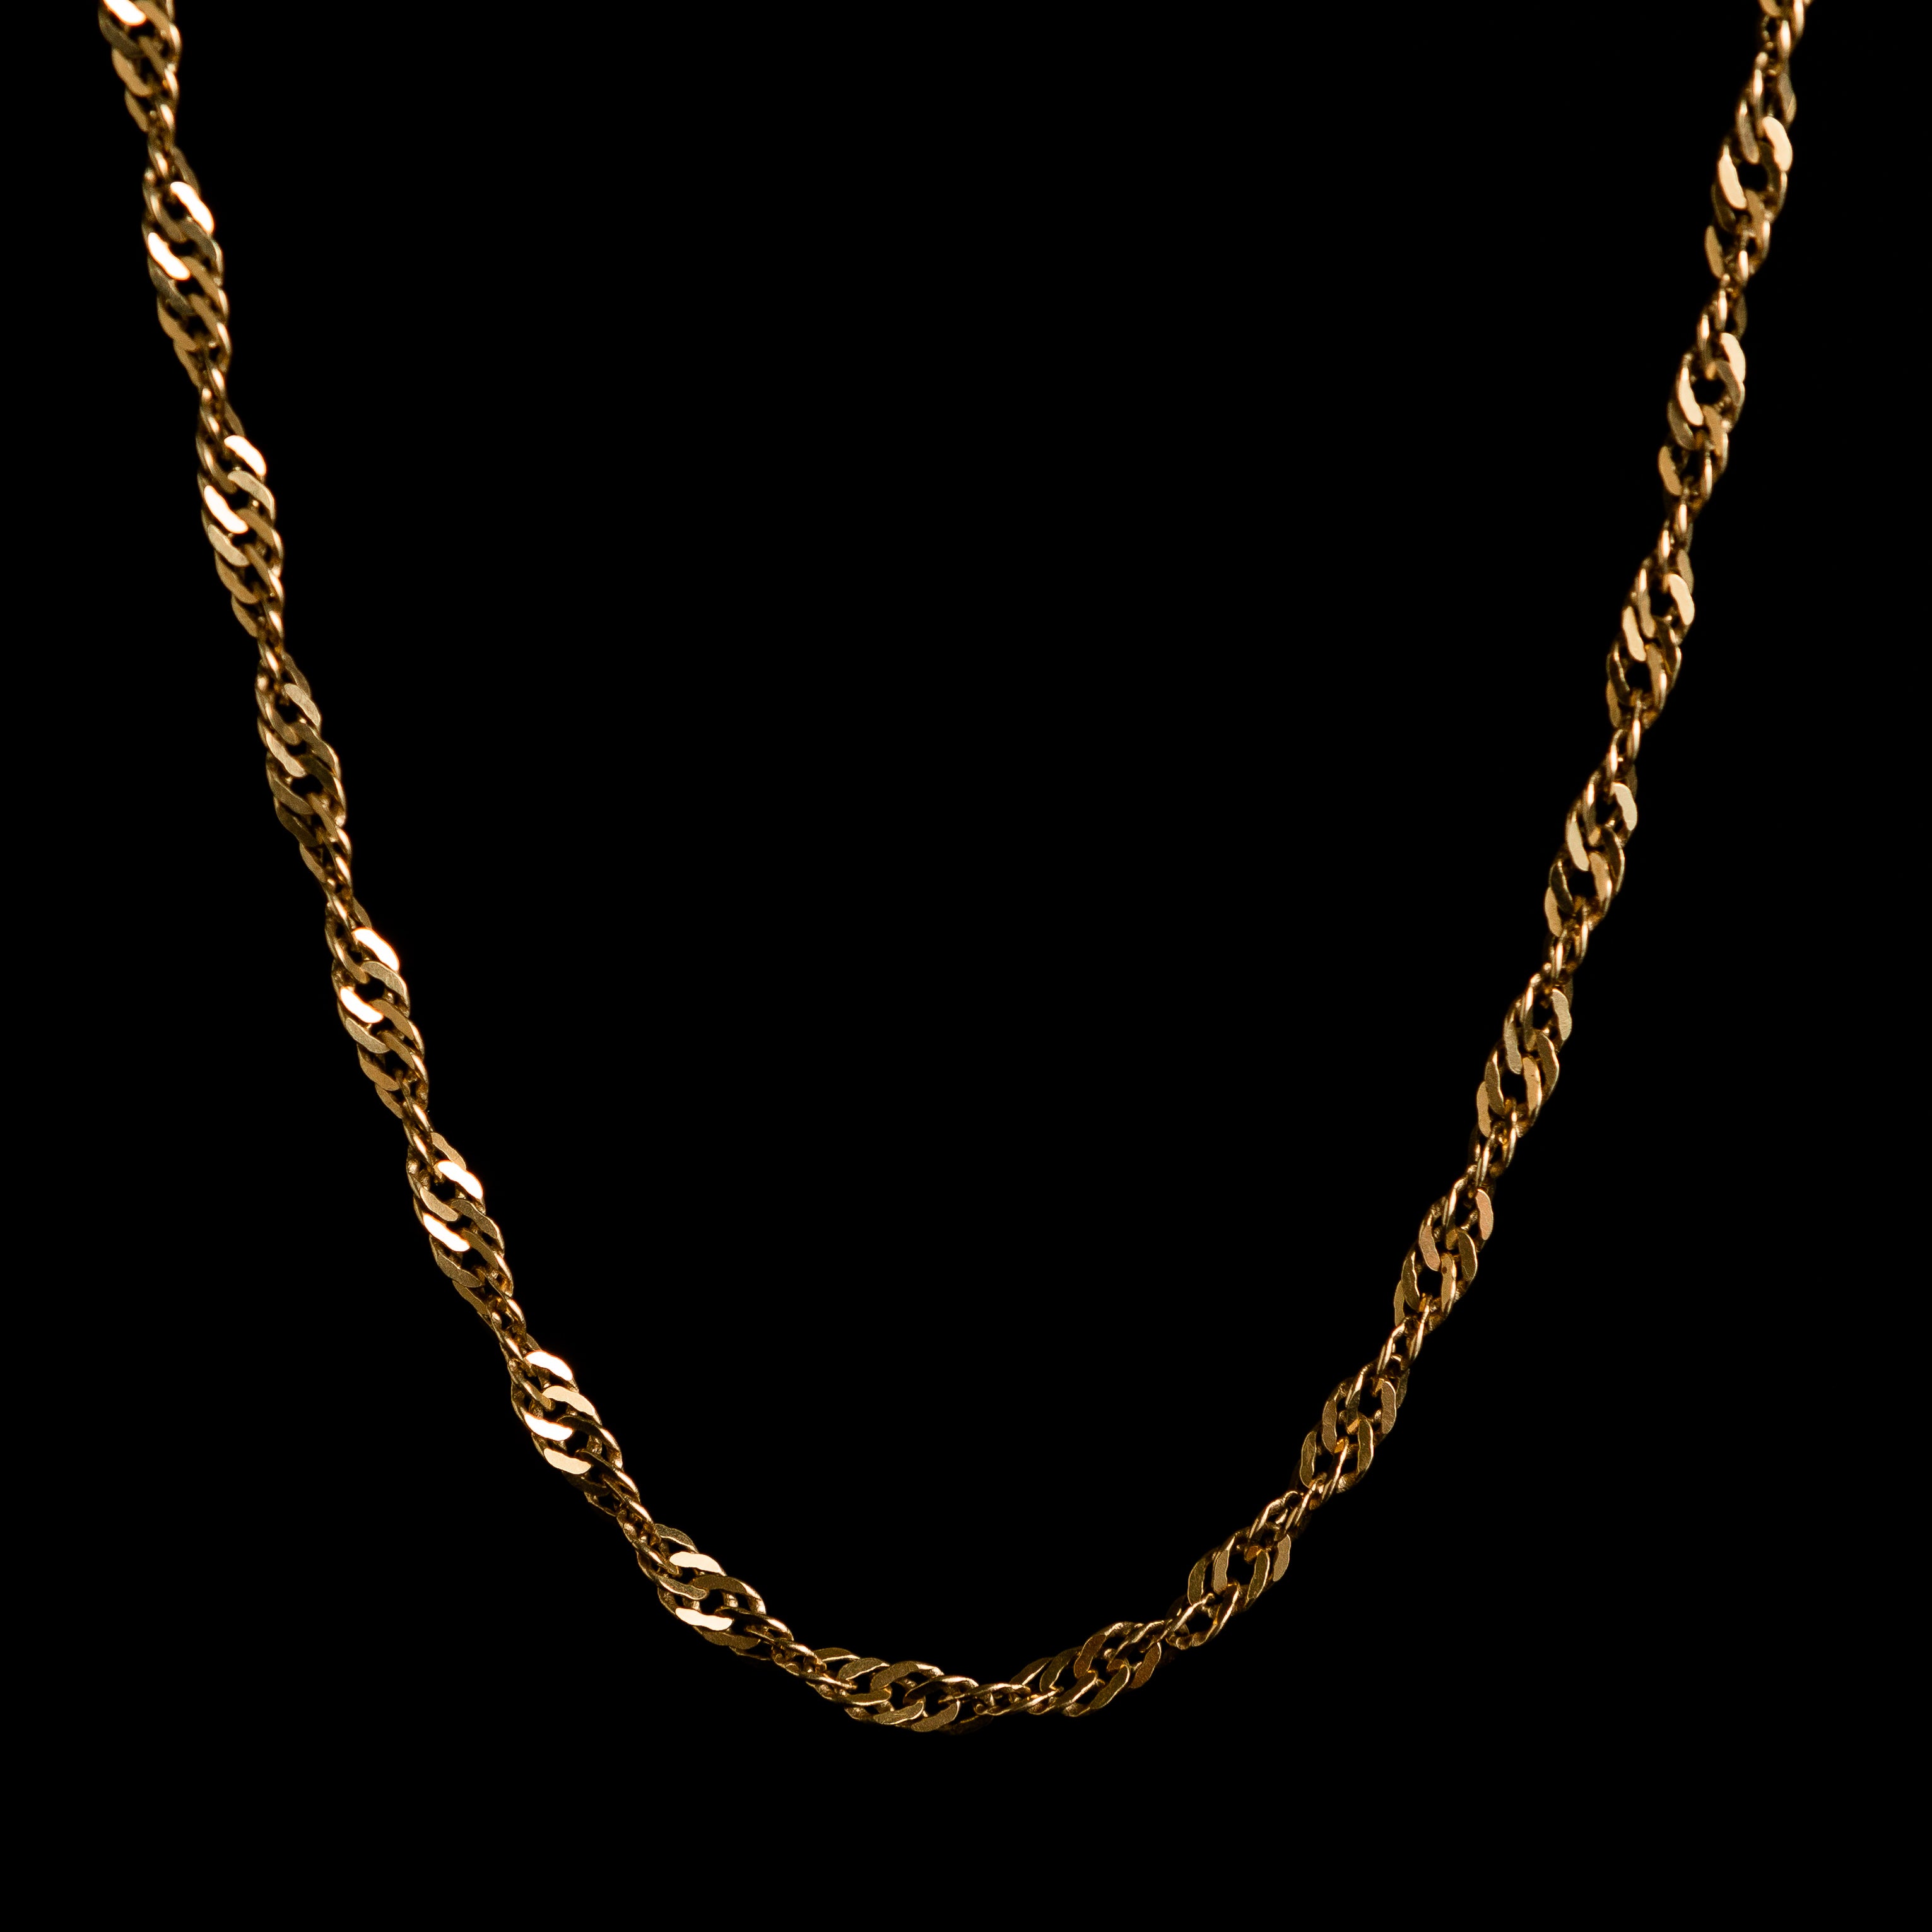 Twisted 9ct Gold Chain Necklace | Posh Totty Designs